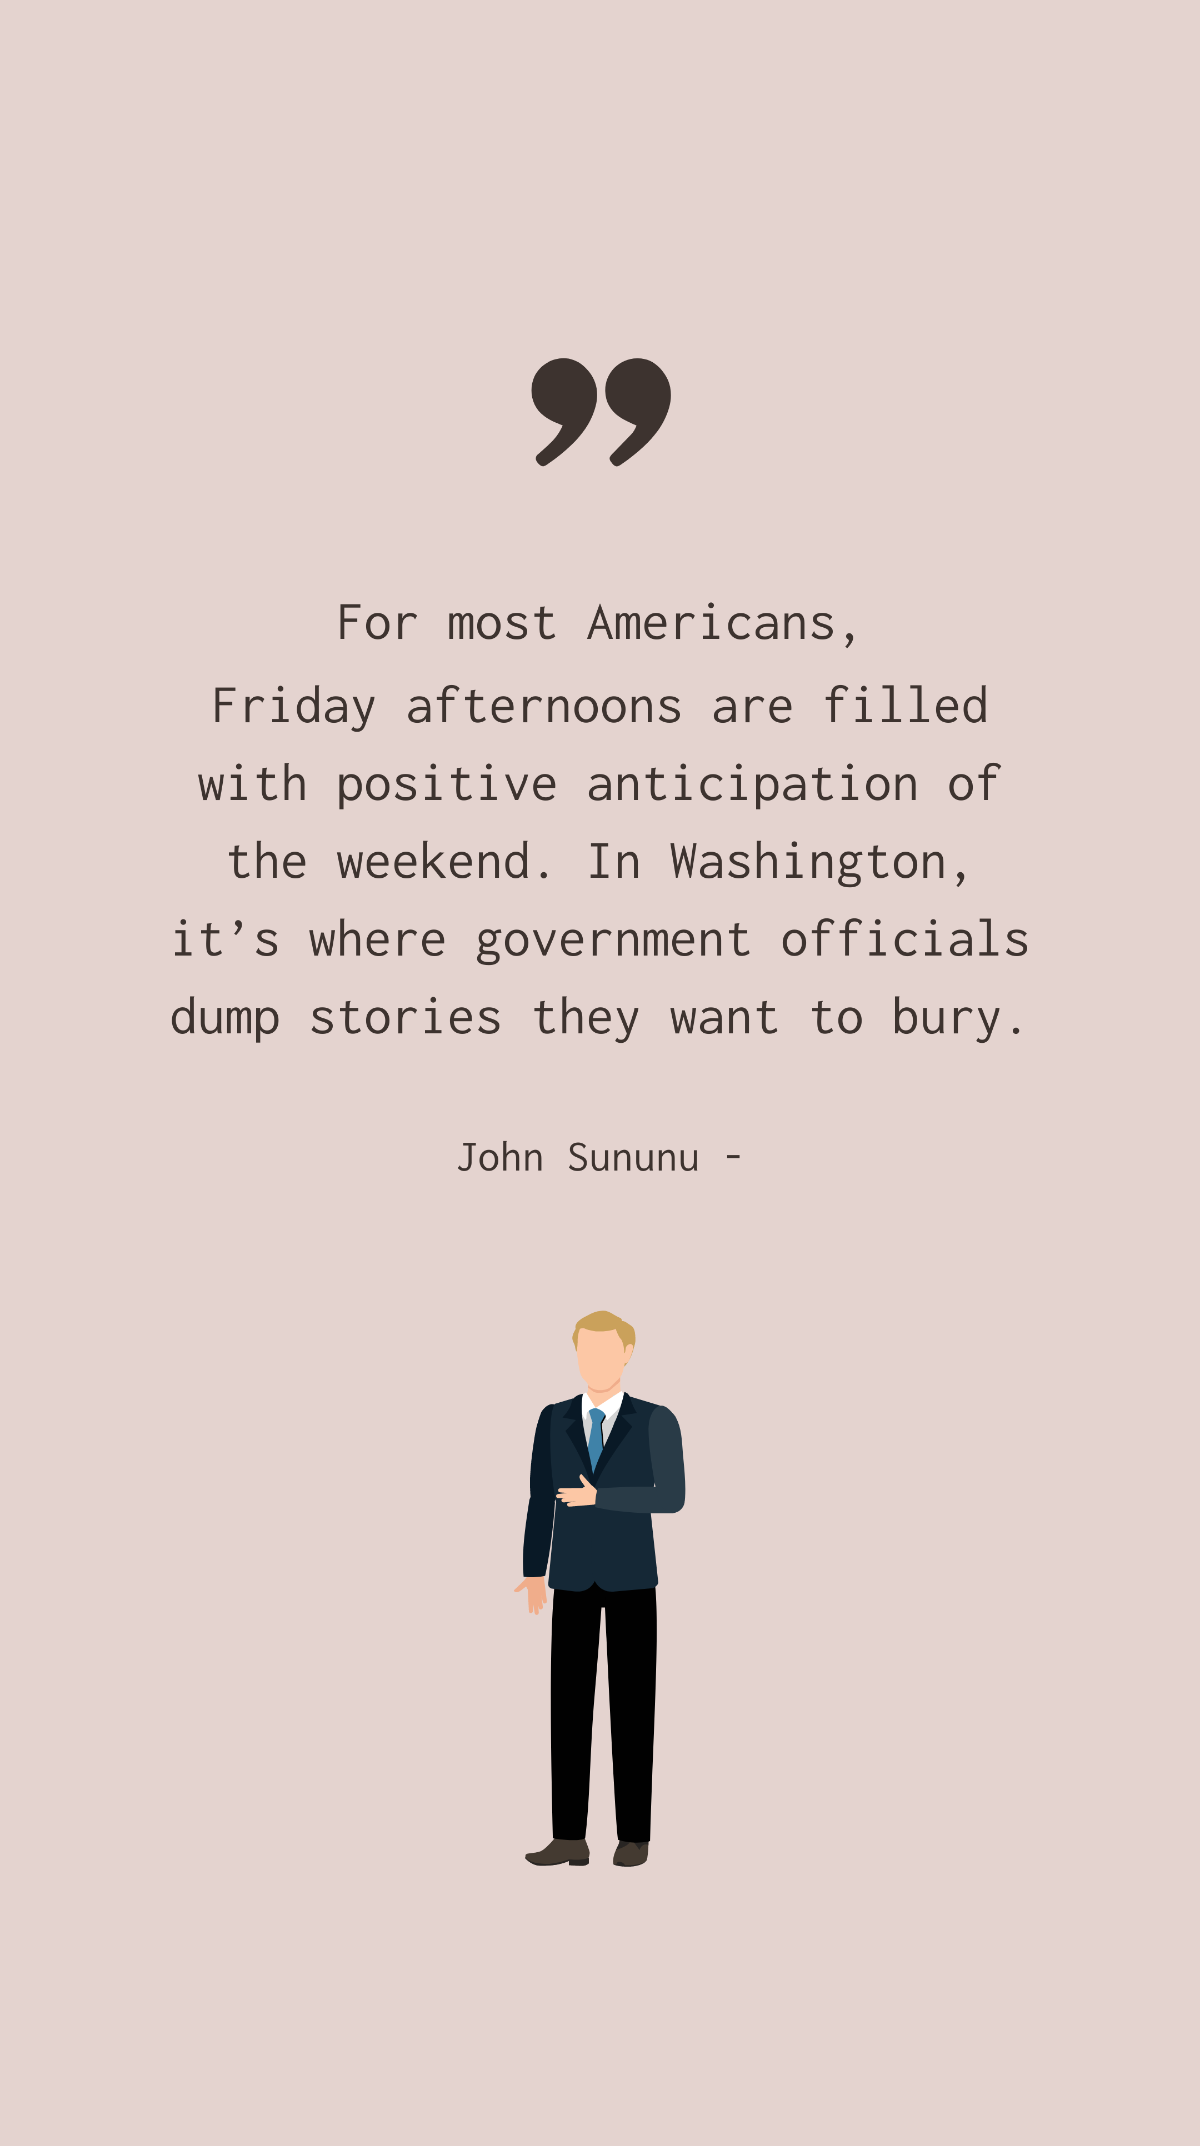 John Sununu - For most Americans, Friday afternoons are filled with positive anticipation of the weekend. In Washington, it’s where government officials dump stories they want to bury. Template